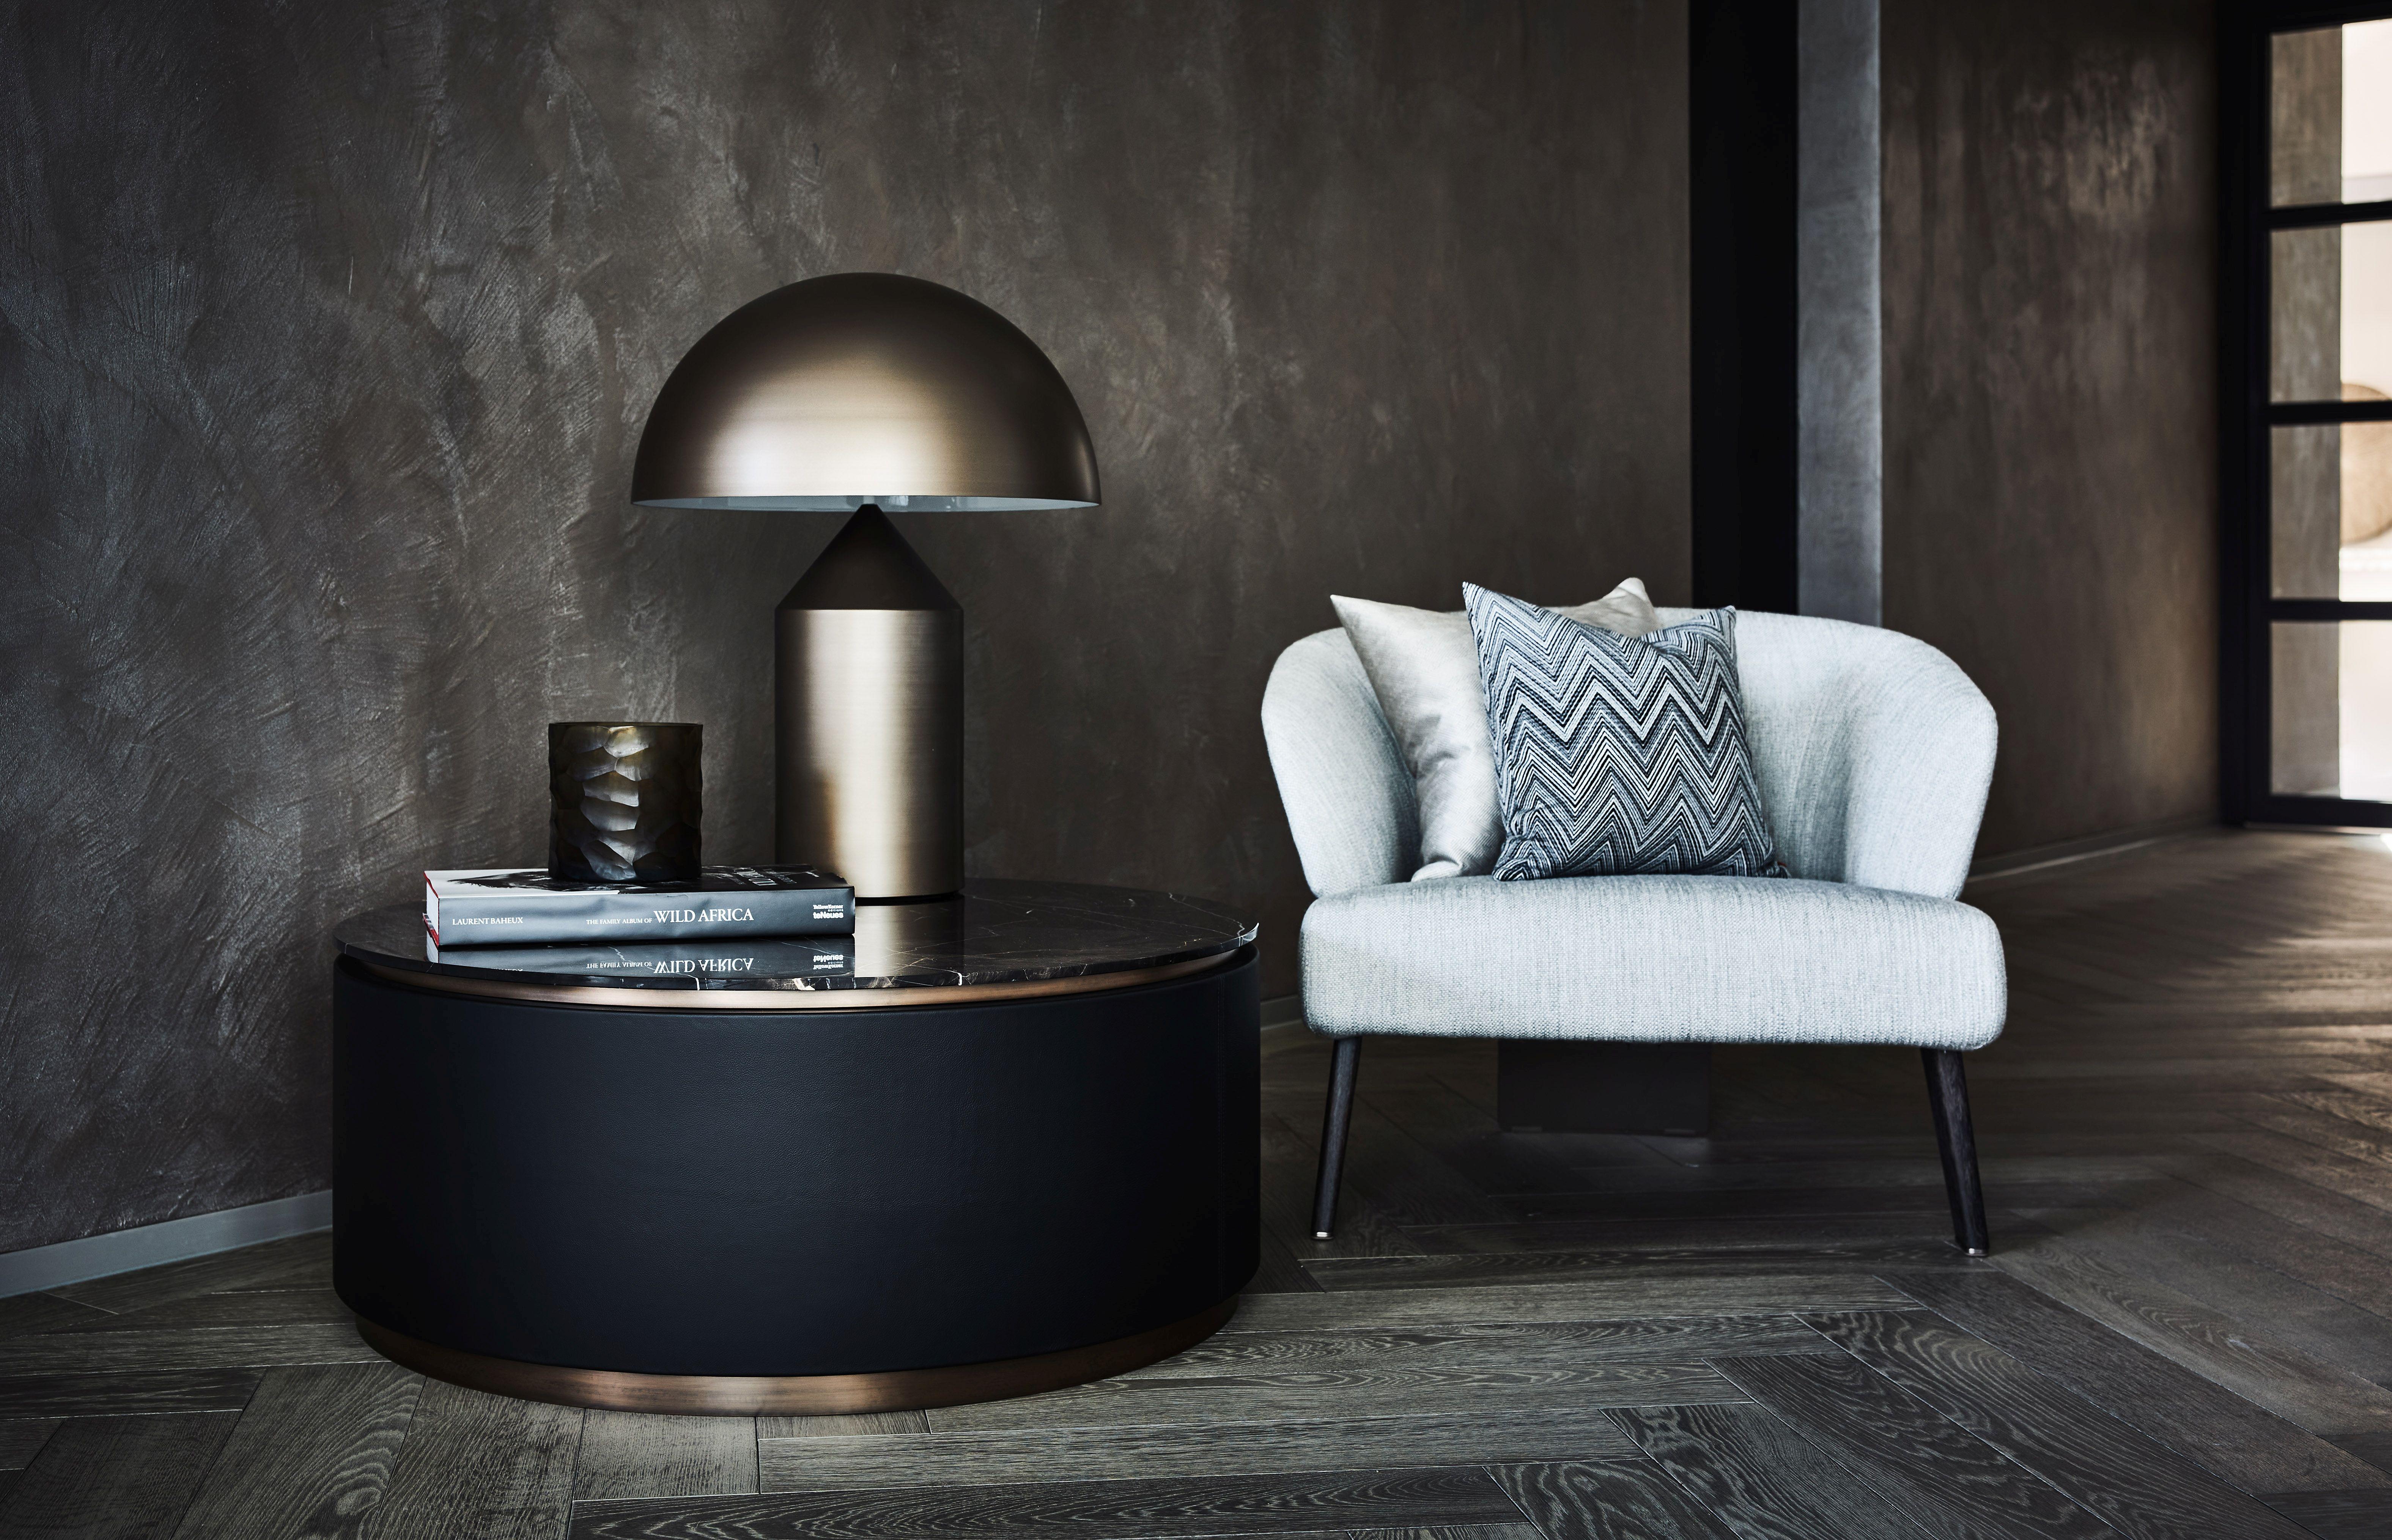 Topaz: This handmade table combines soft leather with beautiful metal lacquered plinths and Italian café amaro marble top.

The Topaz coffee table is no shrinking violet. Its distinctive design is complemented by the close attention paid to detail